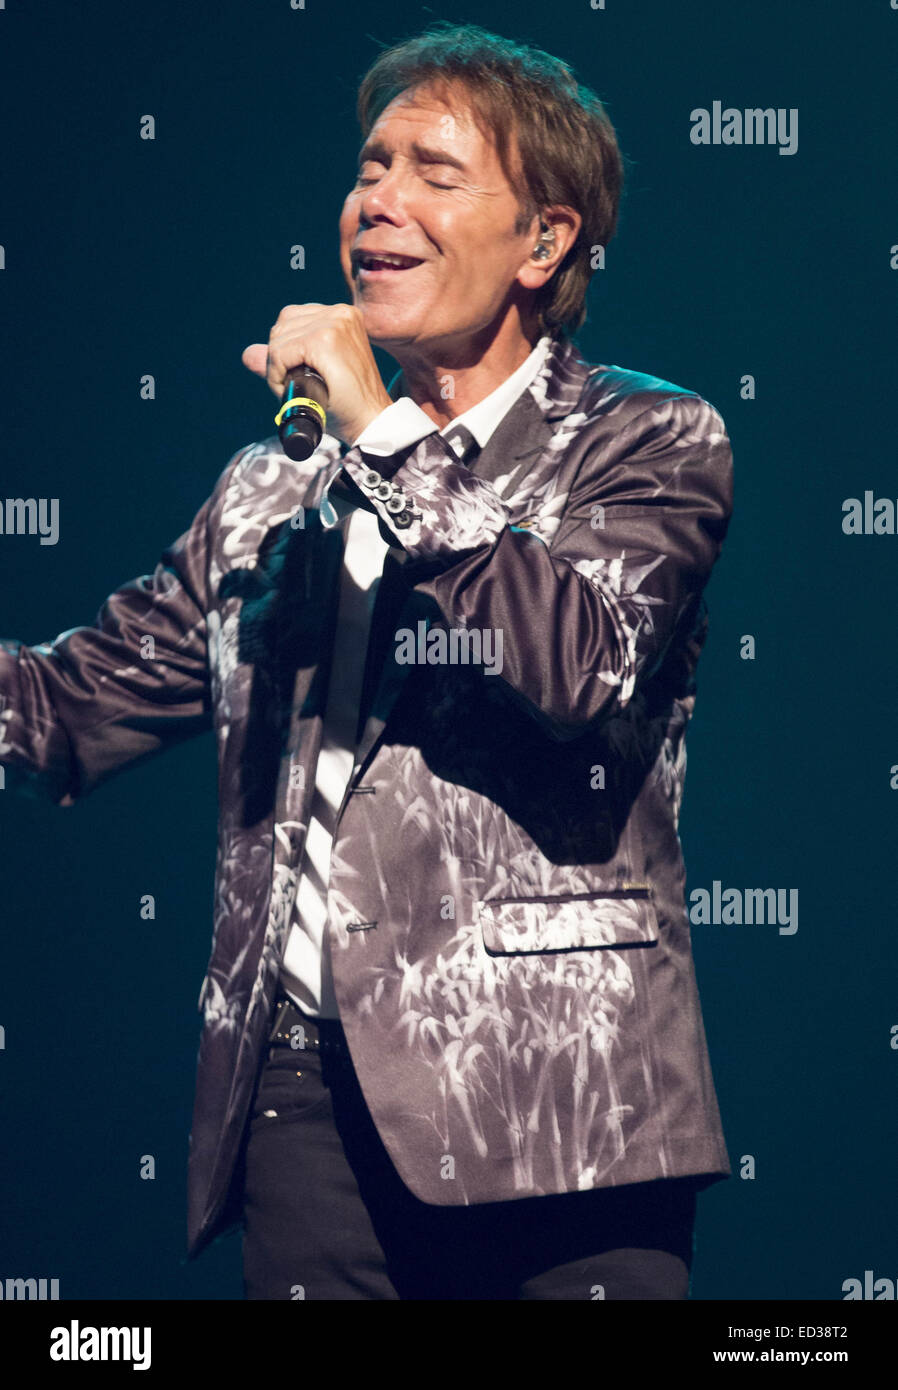 Cliff Richard thanks his loyal fans in New York with free concert and Q&A session at the Gramercy Theatre.  The Living Doll hitmaker had been disappointed after a planned support slot with Morrissey had to be cancelled due to The Smiths' singer's ill heal Stock Photo